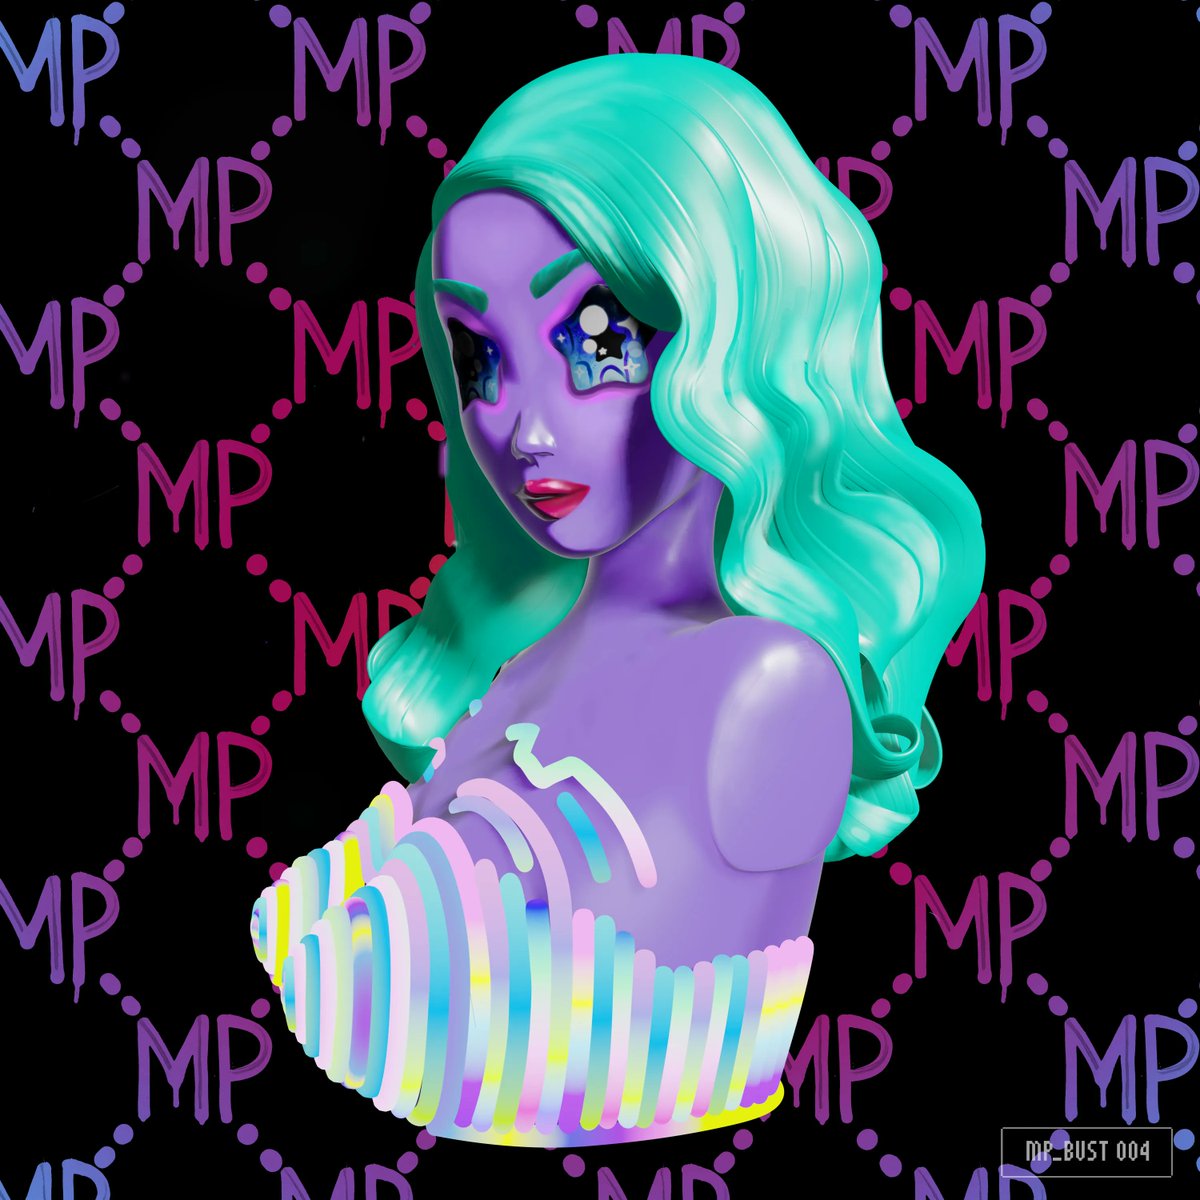 MARZIPAN BUST 004 ✨ this lovely bust and a few more from my genesis collection MARZIPAN BUSTS are available on Opensea for .03 ETH 🤩 buff.ly/43xXsNS #NFT #NFTart #NFTcollector #digitalart #3dnft #3dsculpt #surrealart #pfp #characterart